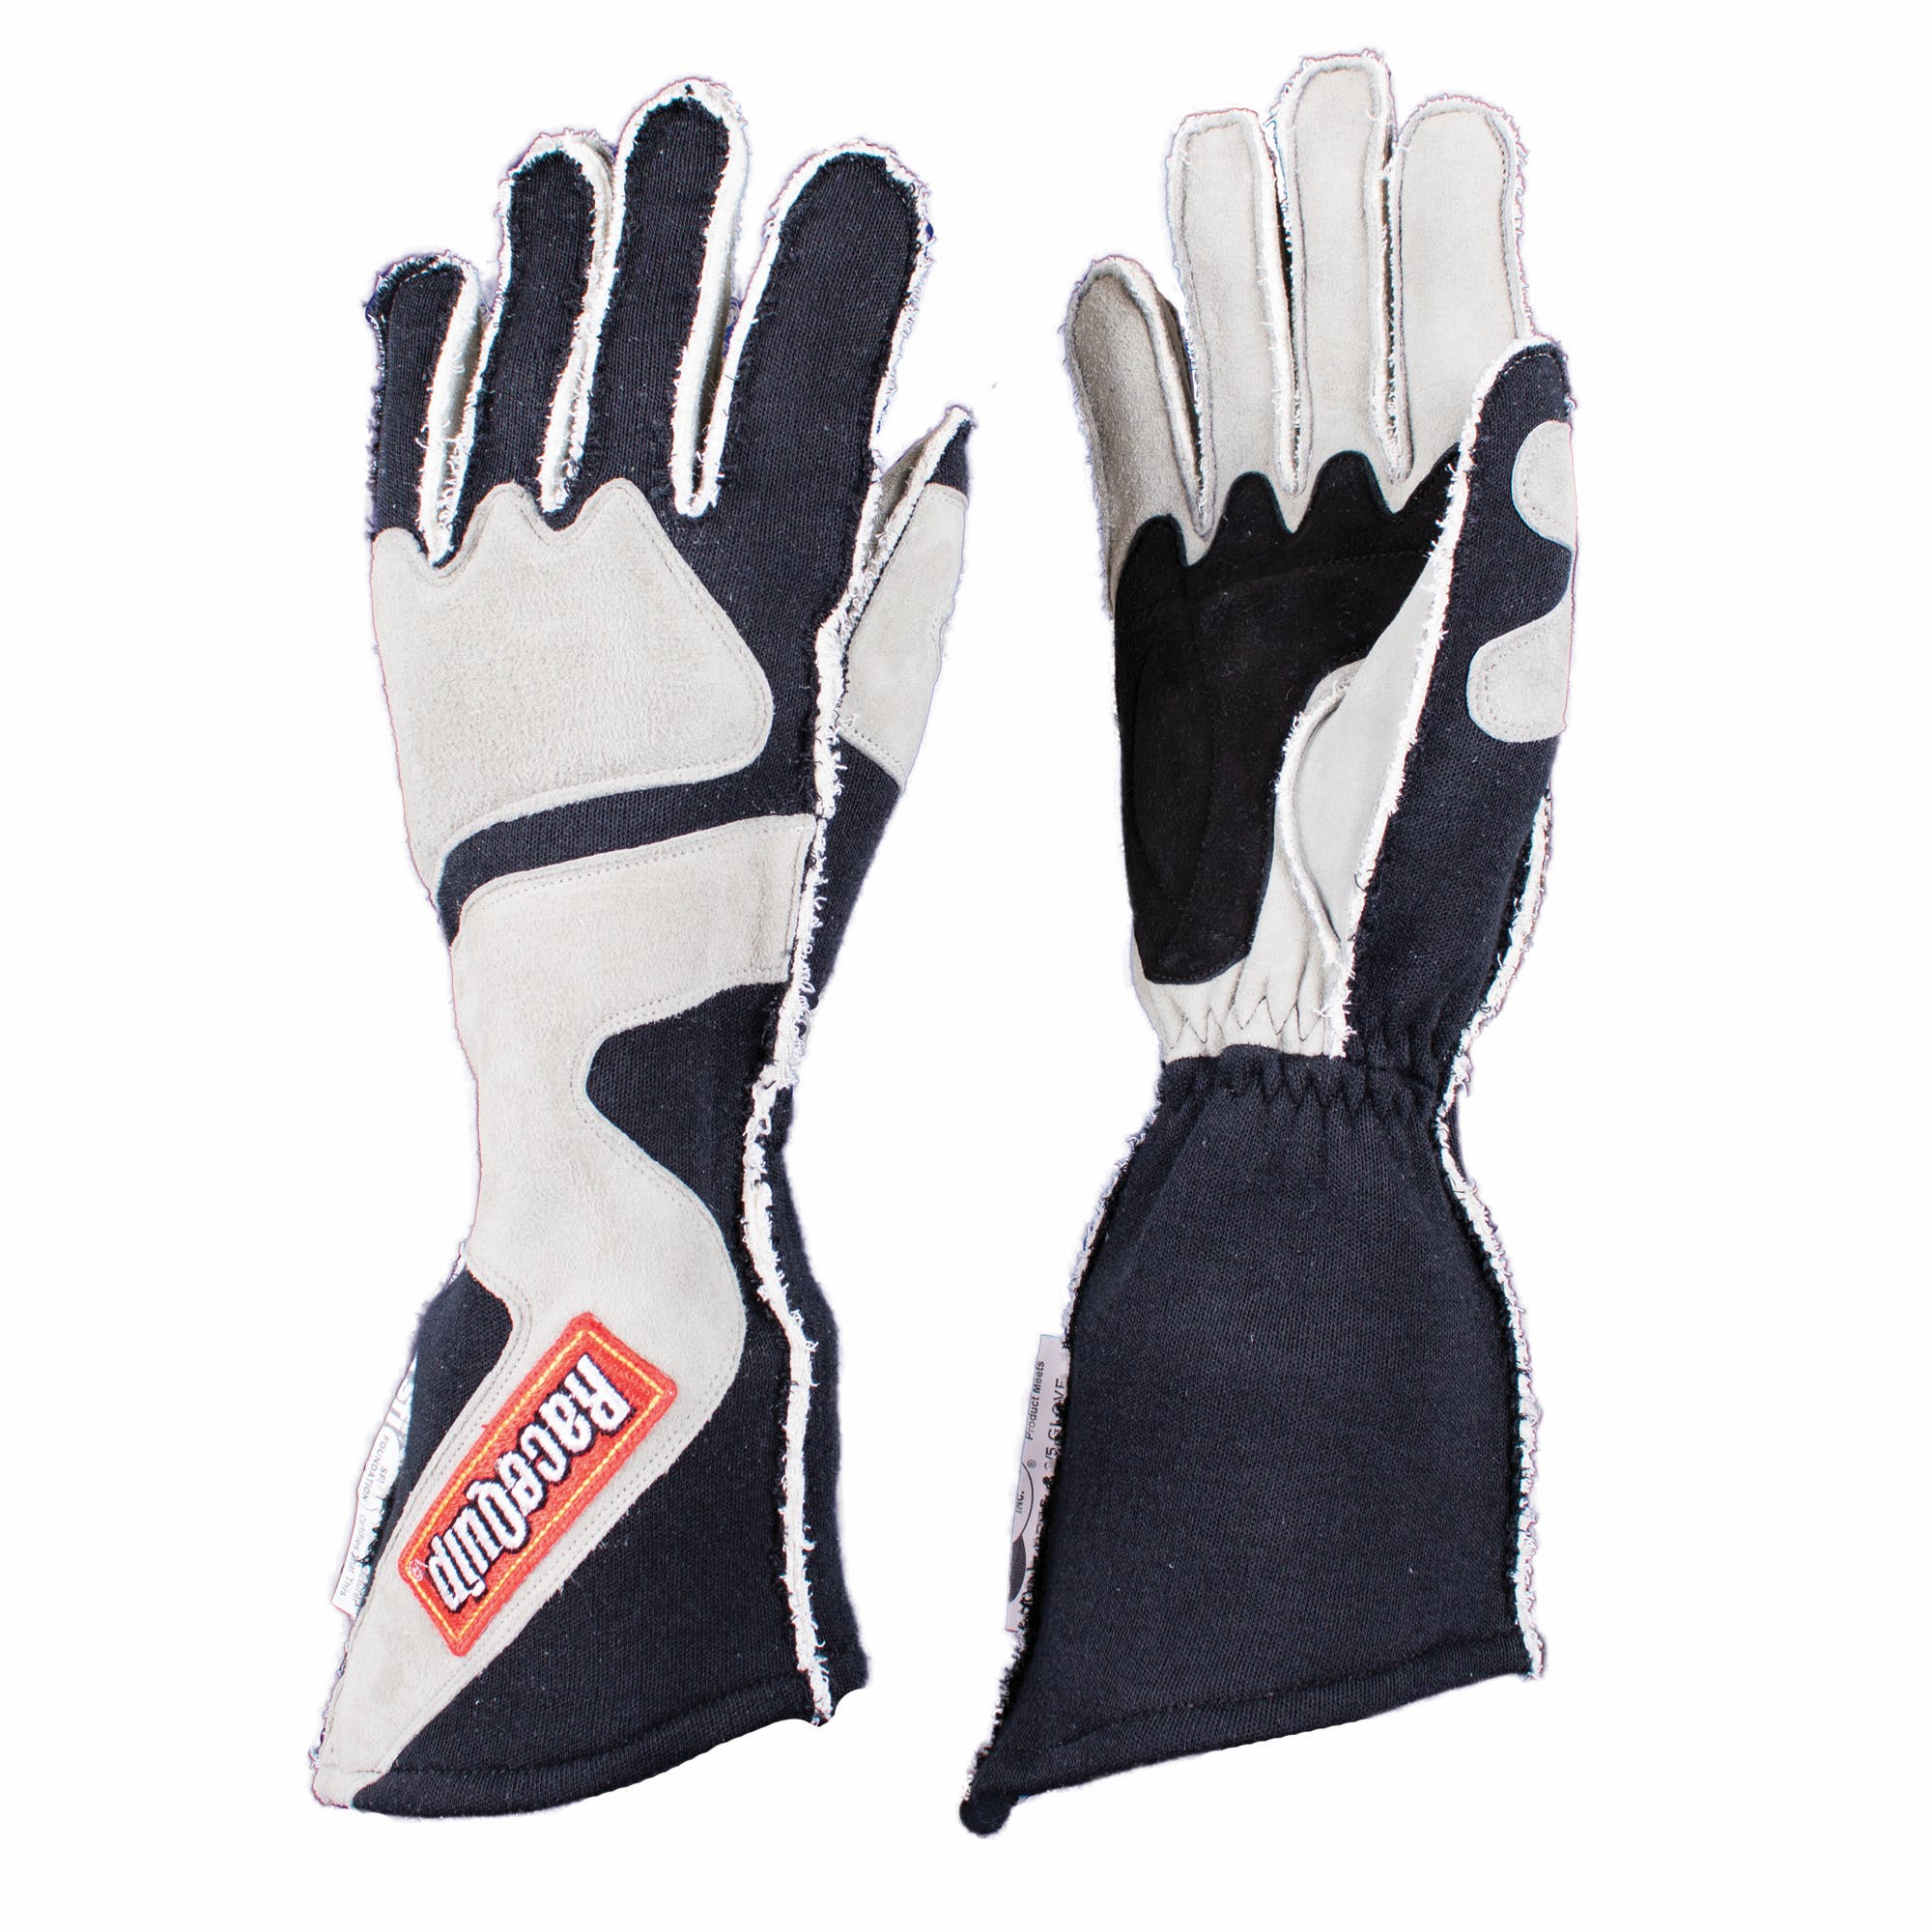 RaceQuip 359605 SFI-5 Out Seam Angle-Cut Gauntlet Racing Gloves (Gray/Black, Large)